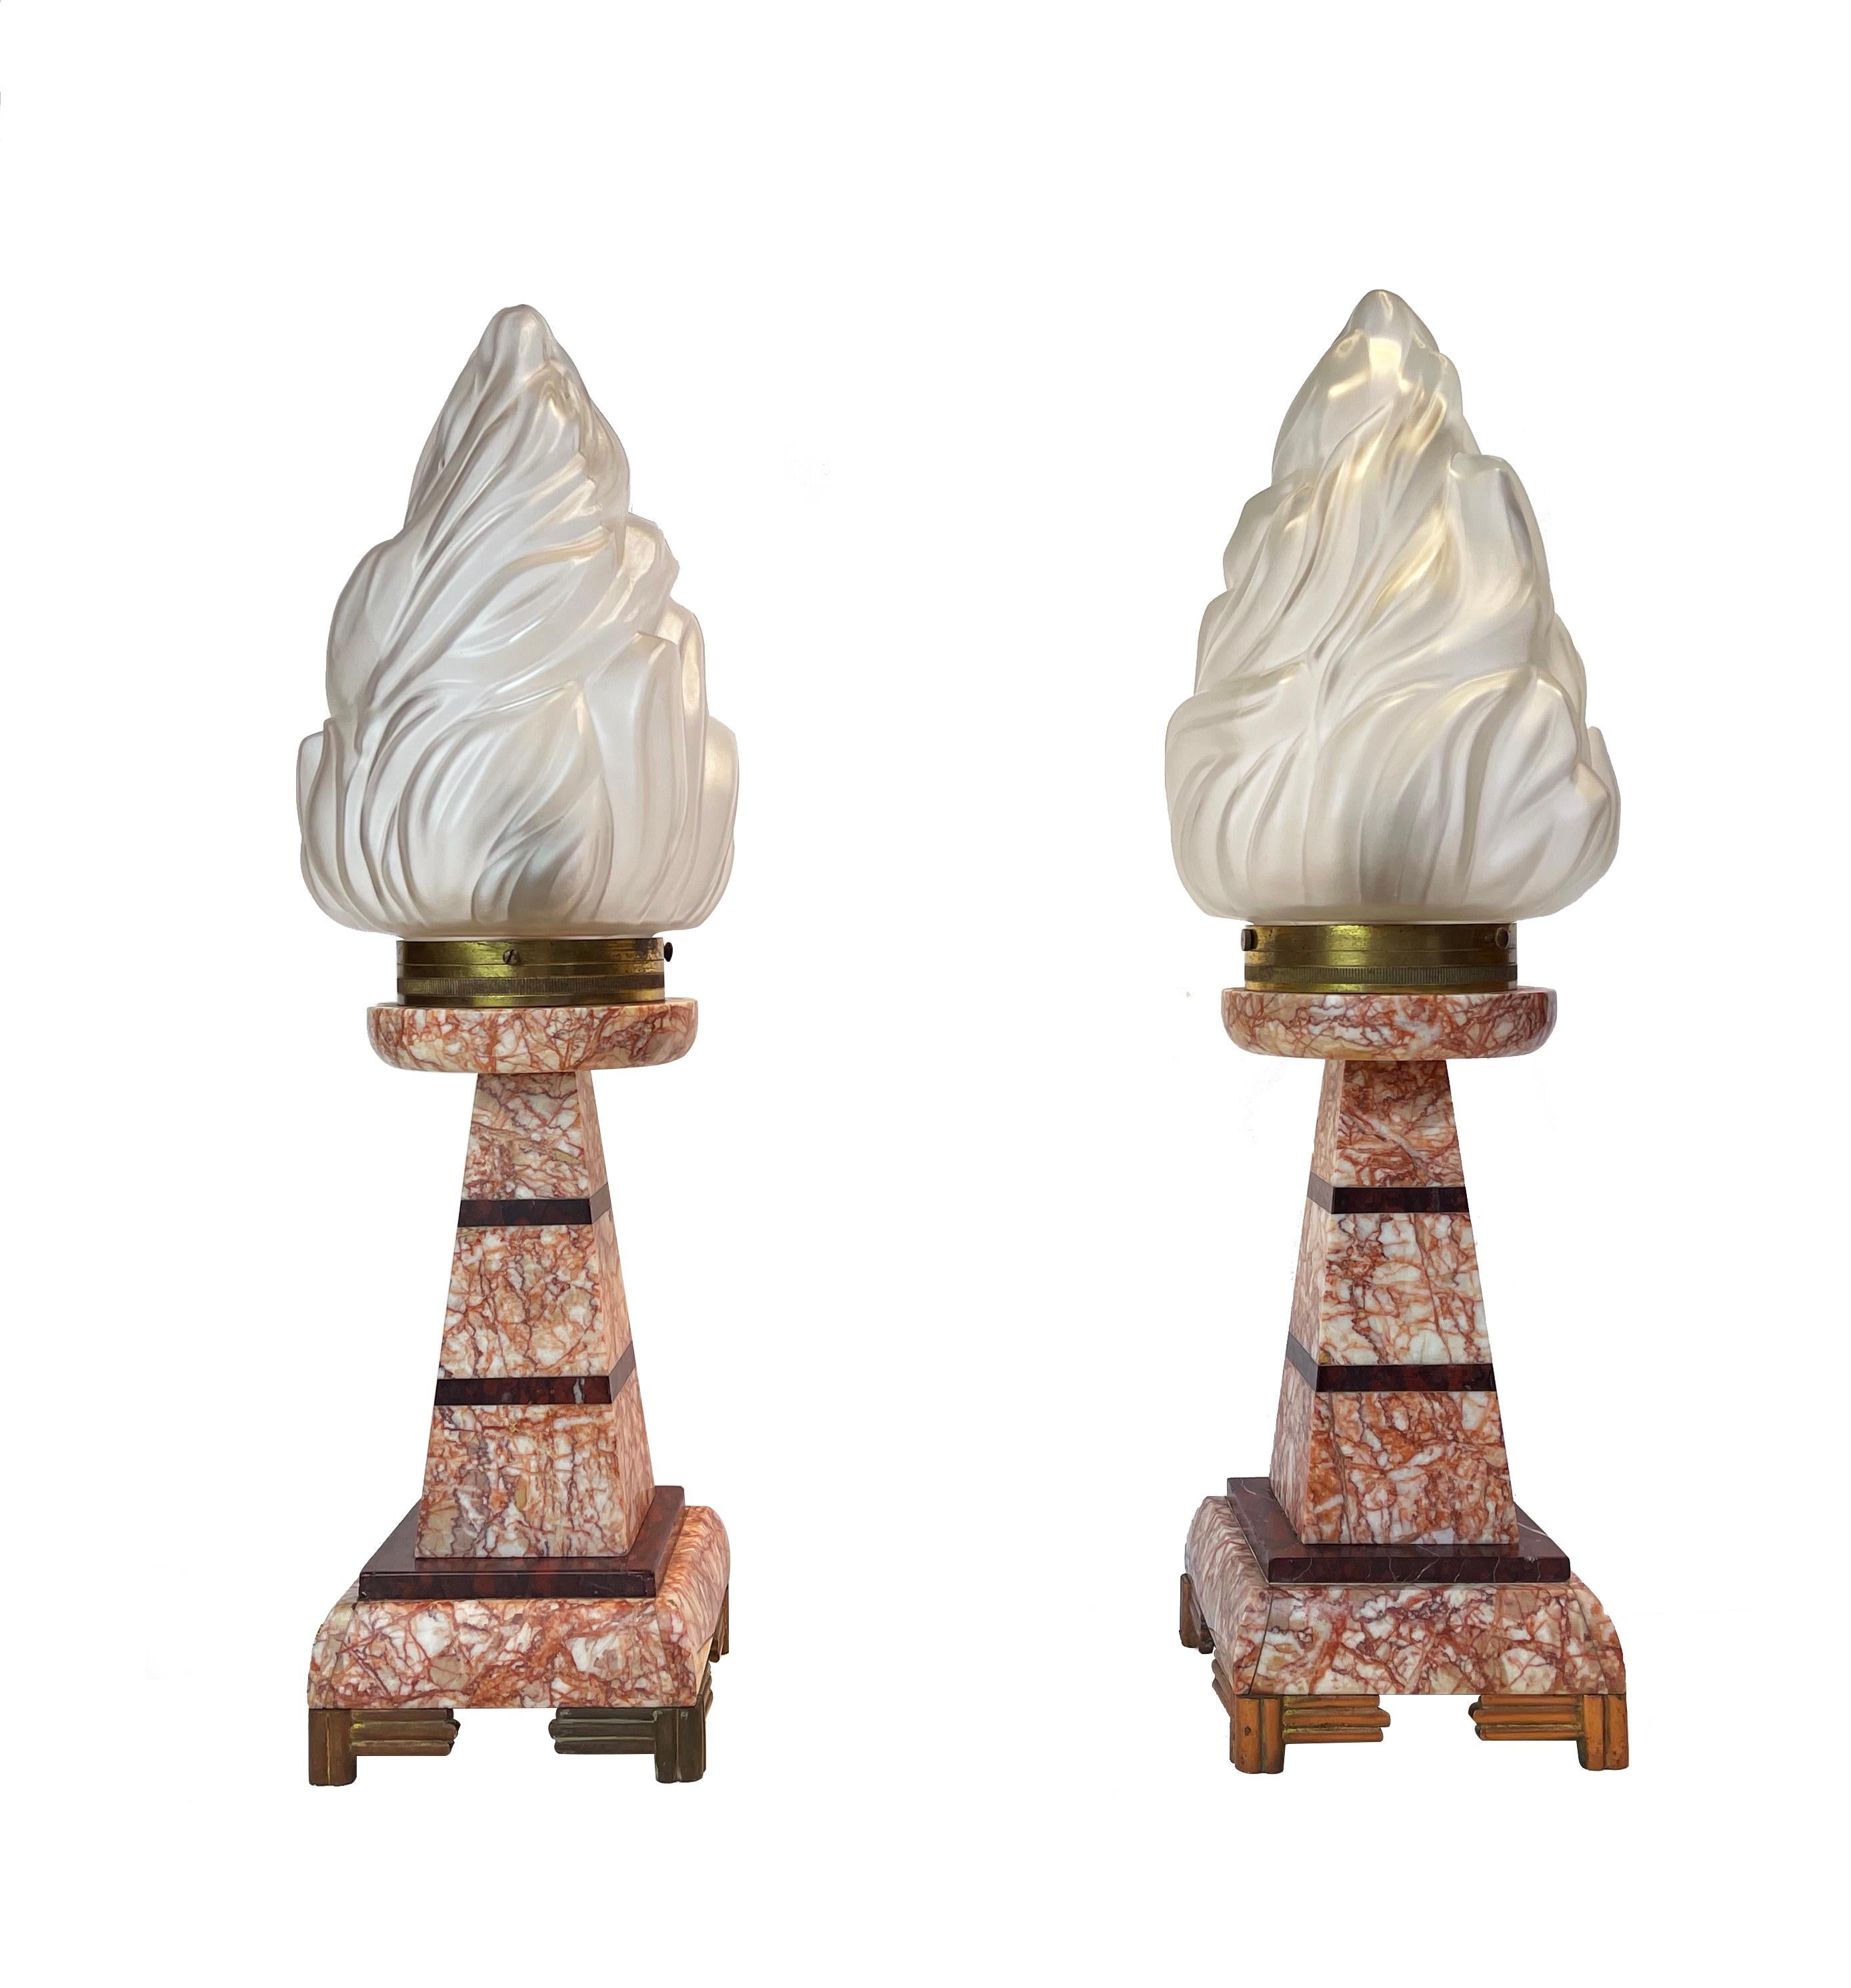 Expressive and indeed unusual set of two French Art Deco table lamps with a hint of an Empire style from the 1930s approx..
This particular style of torch lights was introduced at the Paris Exhibition in 1855.

The lamps come in a red or pink